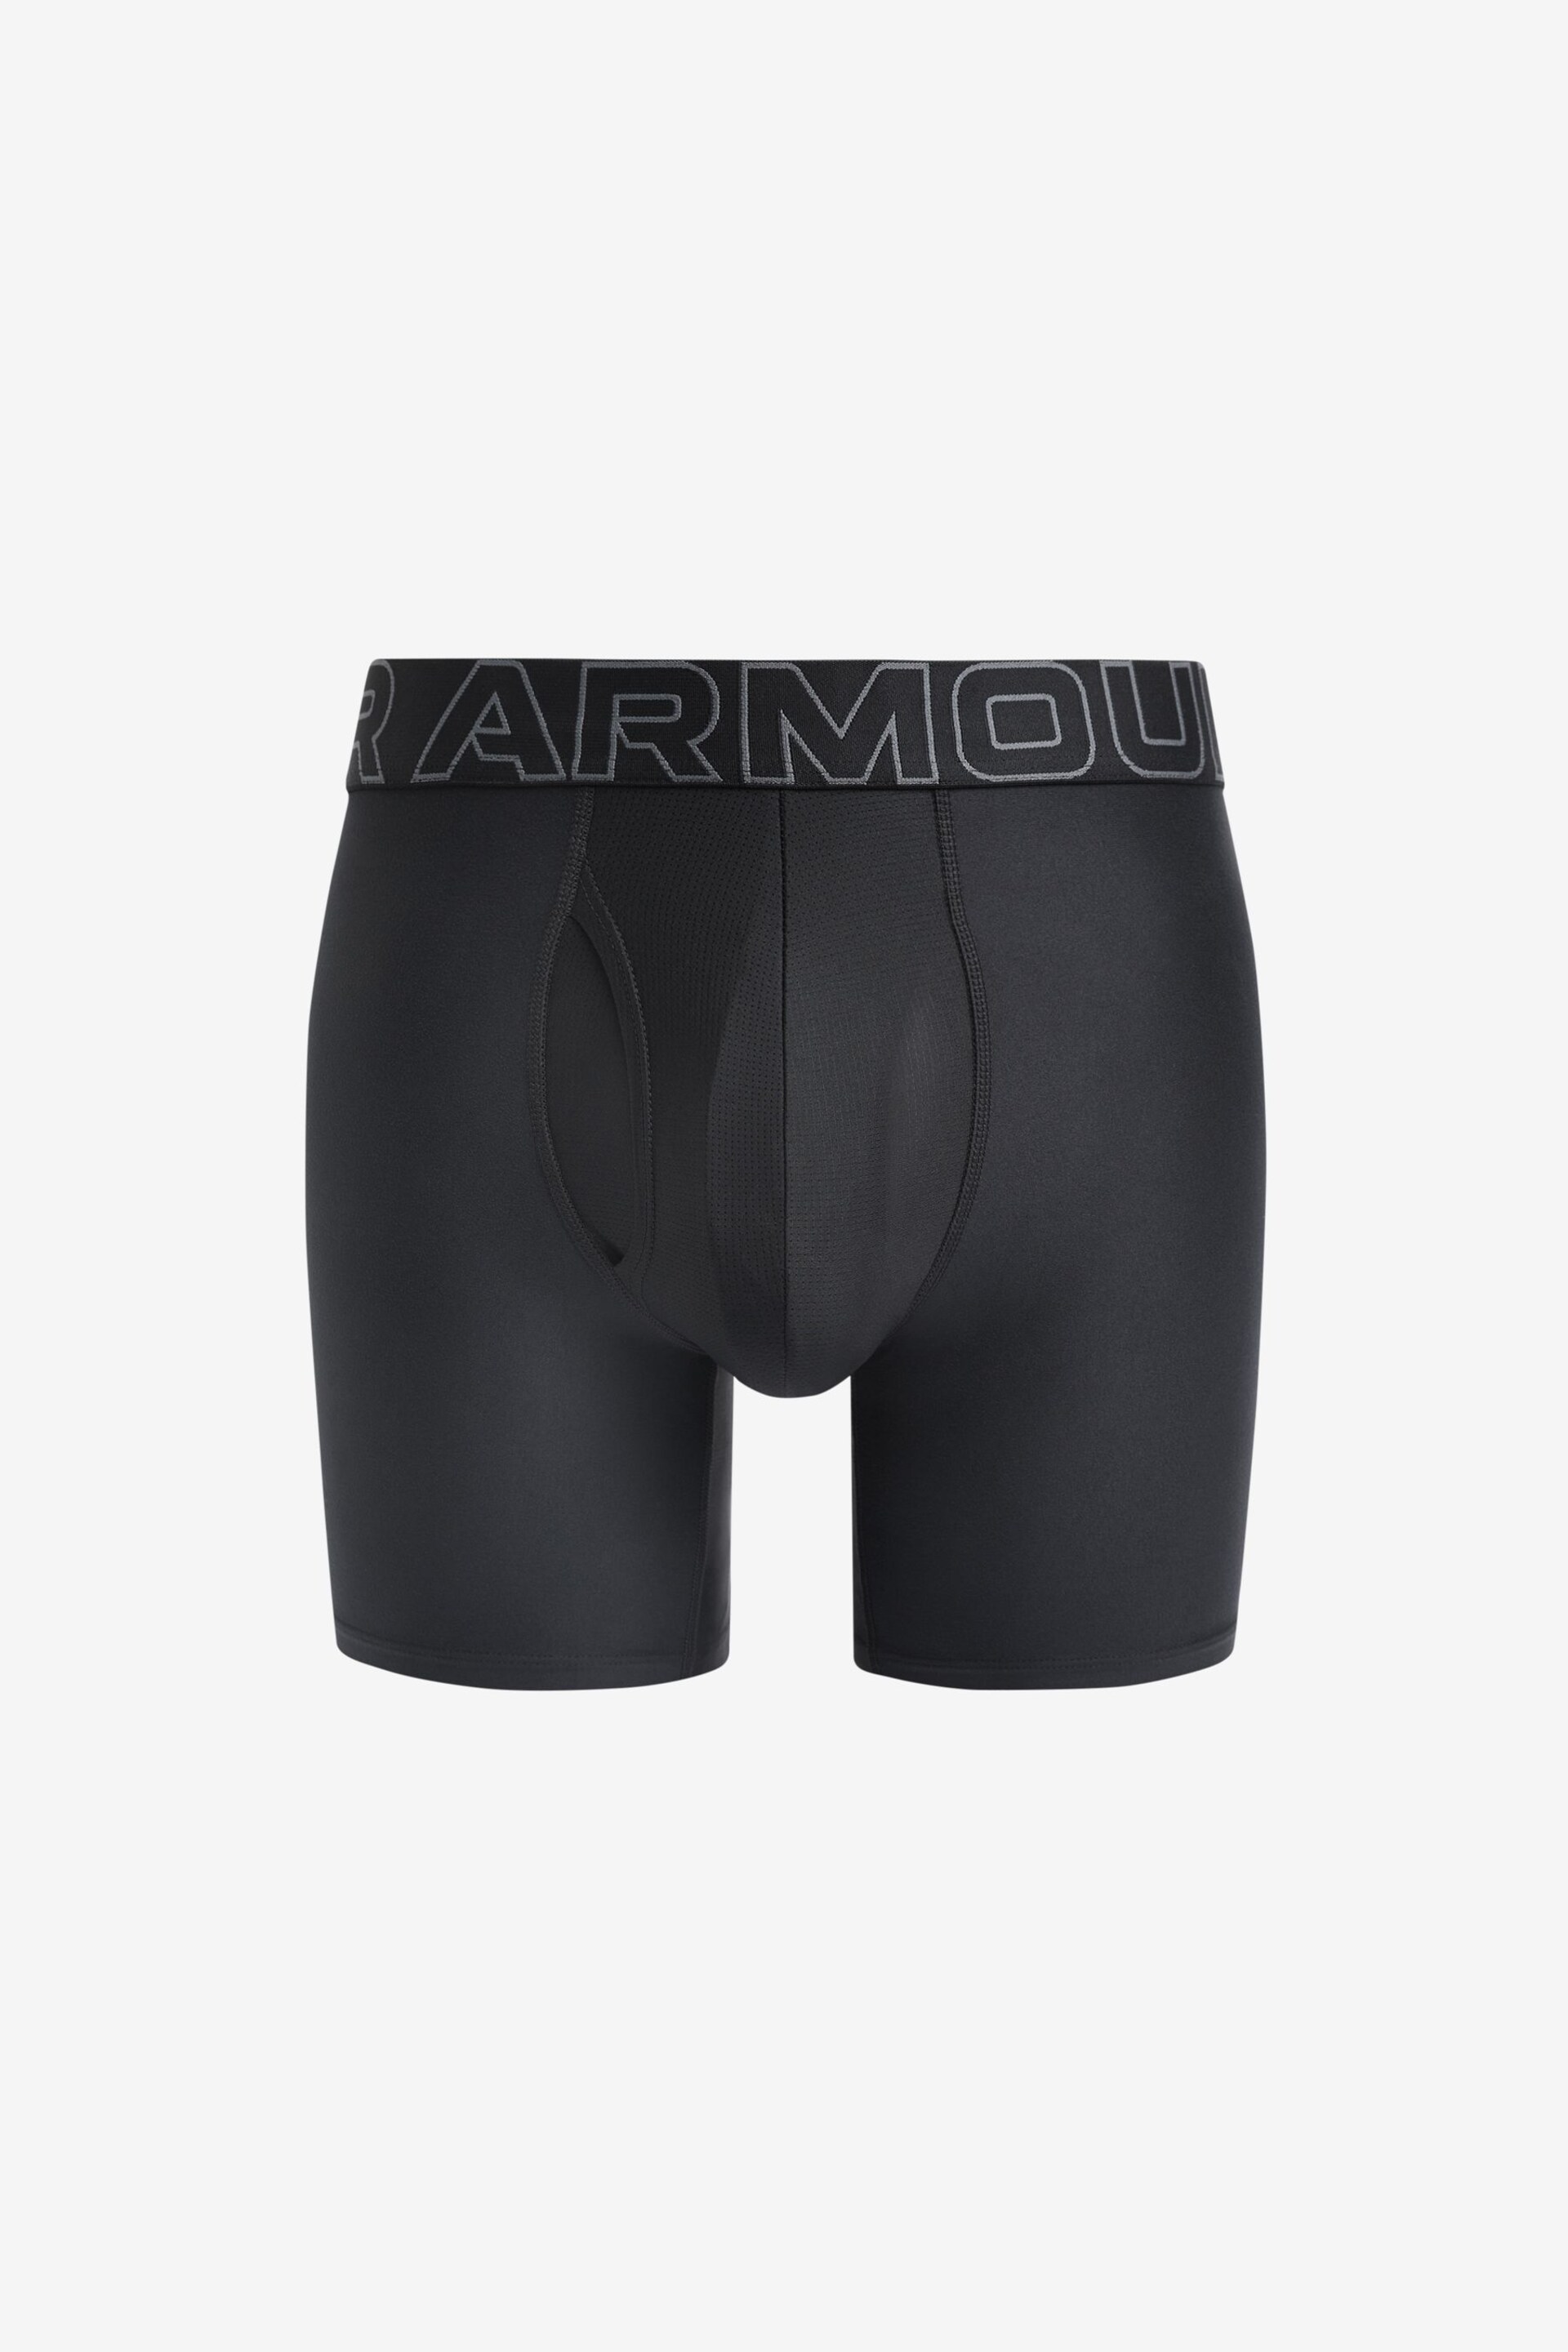 Under Armour Black Performance Tech Boxers 3 Pack - Image 2 of 6